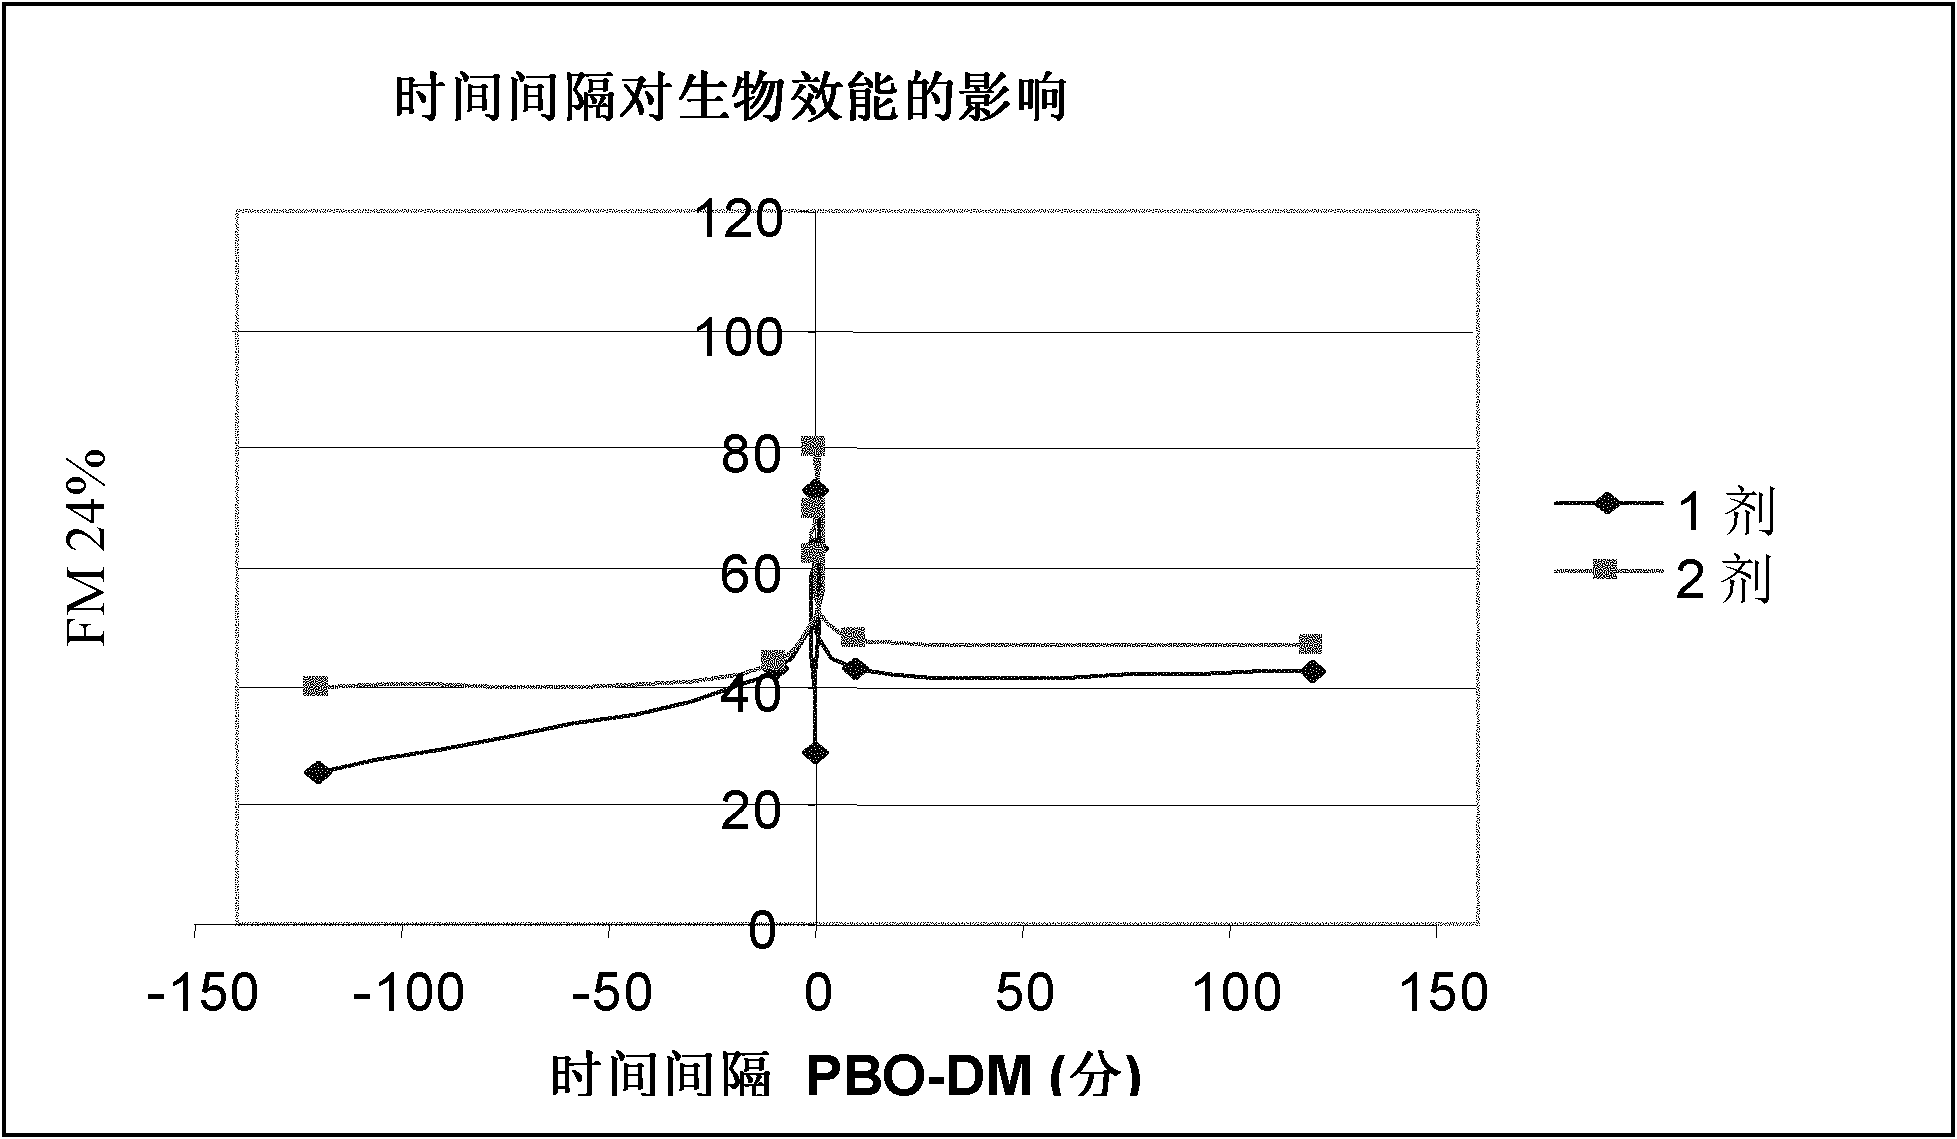 Insecticidal polymer matrix comprising hdpe and ldpe